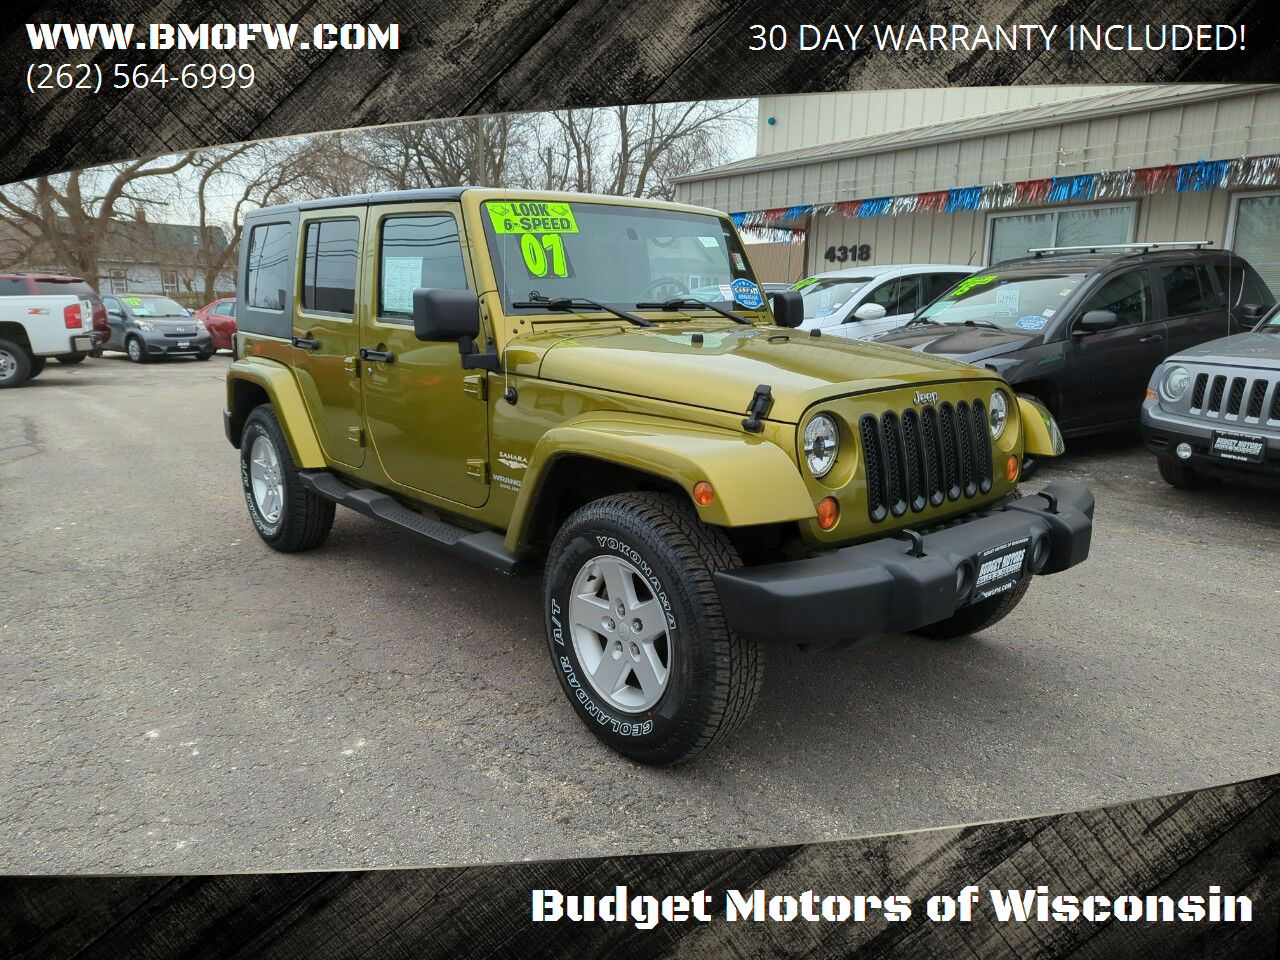 2007 Jeep Wrangler Unlimited For Sale In Milwaukee, WI ®